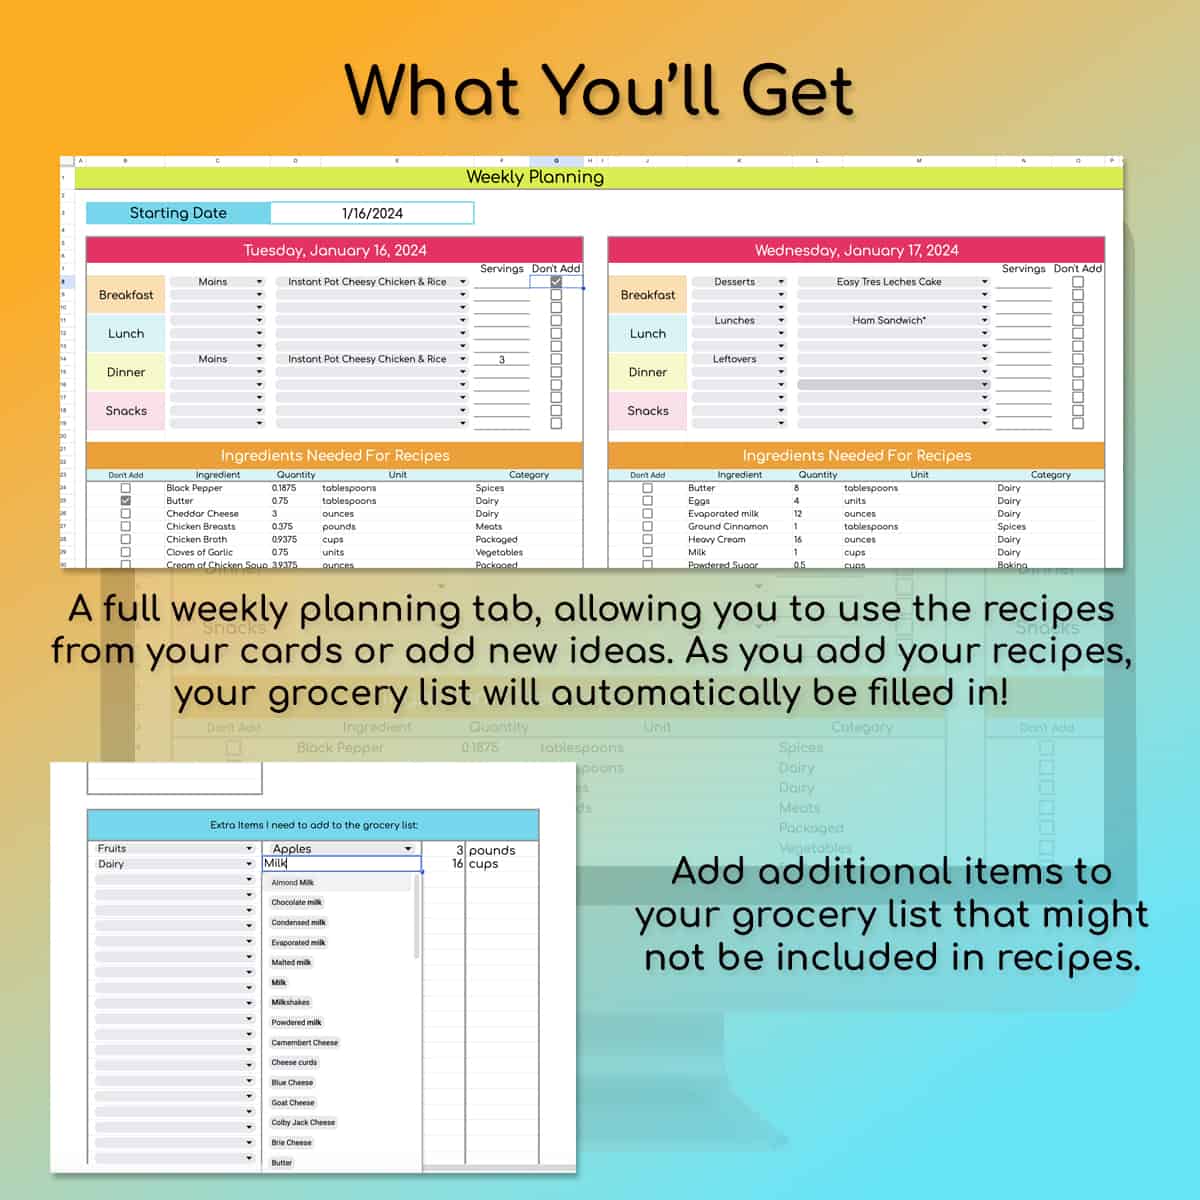 meal planning tab and extra items list.